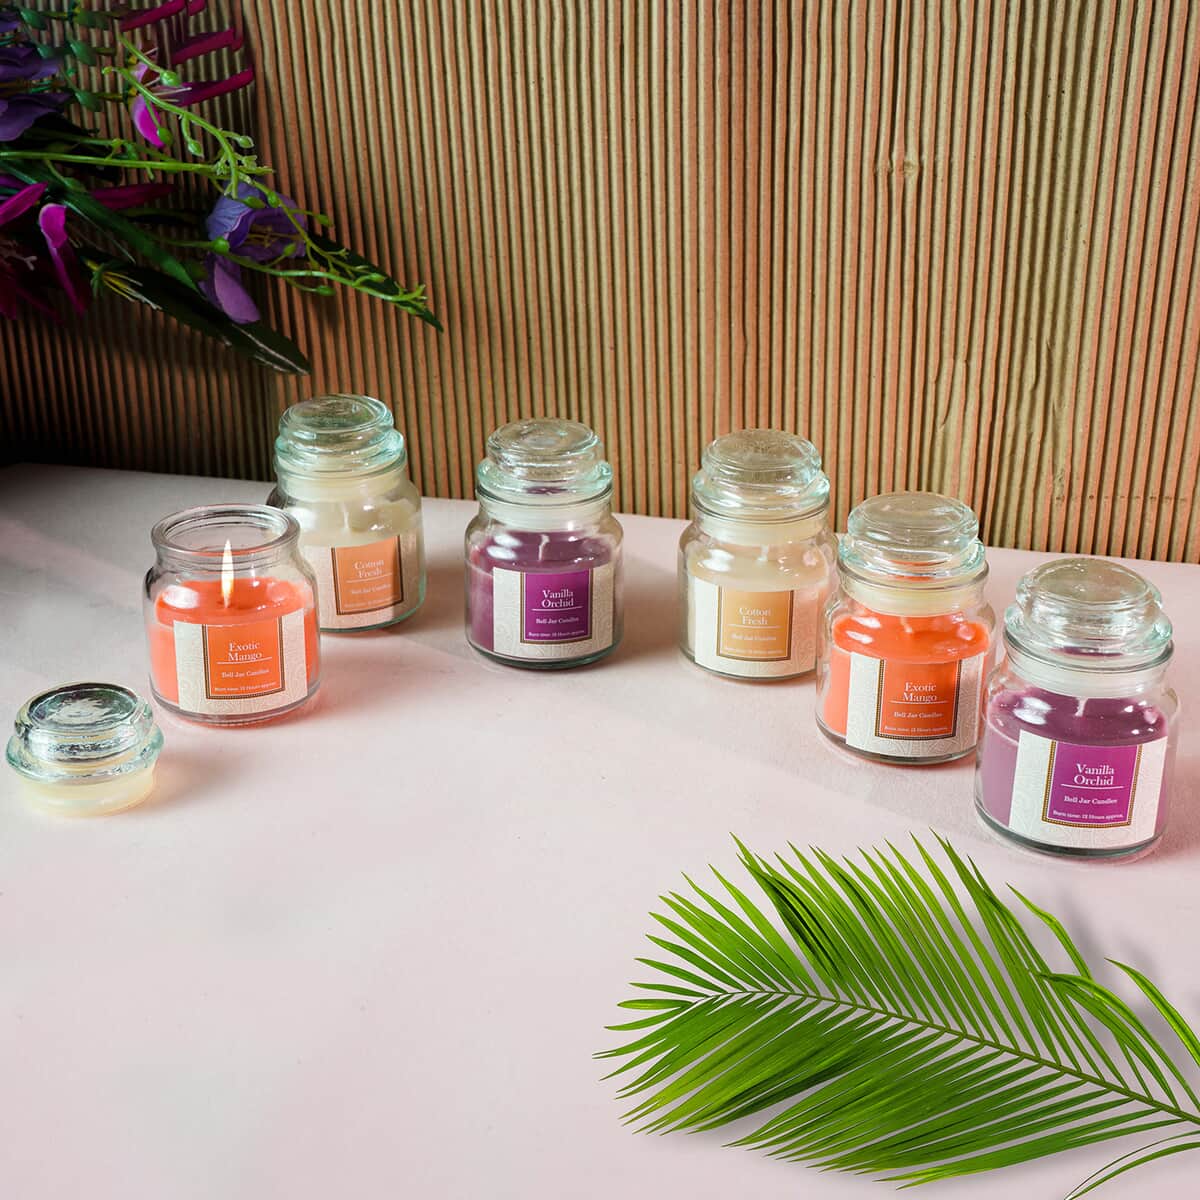 Set of 6 Bell Jar Wick Scented Candles, Reusable Mood Enhancing Candle Jars Gift Set (Scents: Exotic Mango, Vanilla Orchid, and Cotton Fresh) image number 1